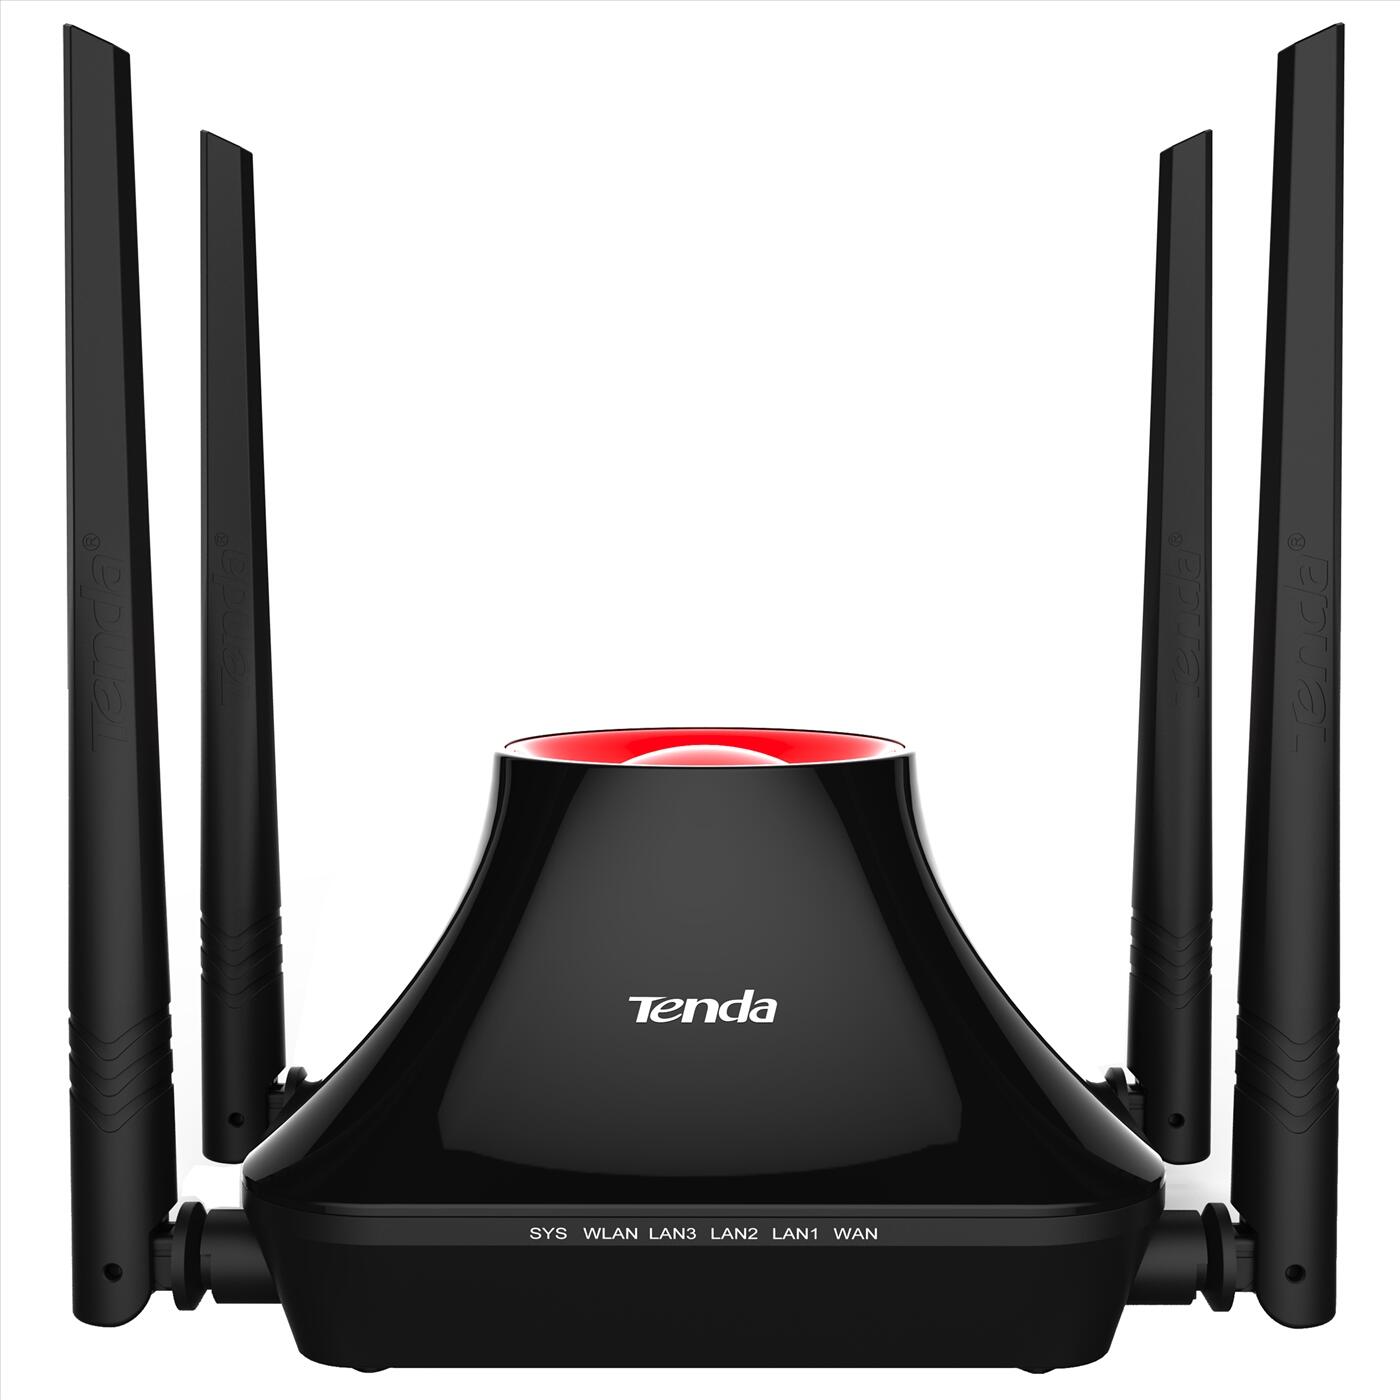 Tenda T845 Wireless wifi router 300Mbps wi-fi repeater